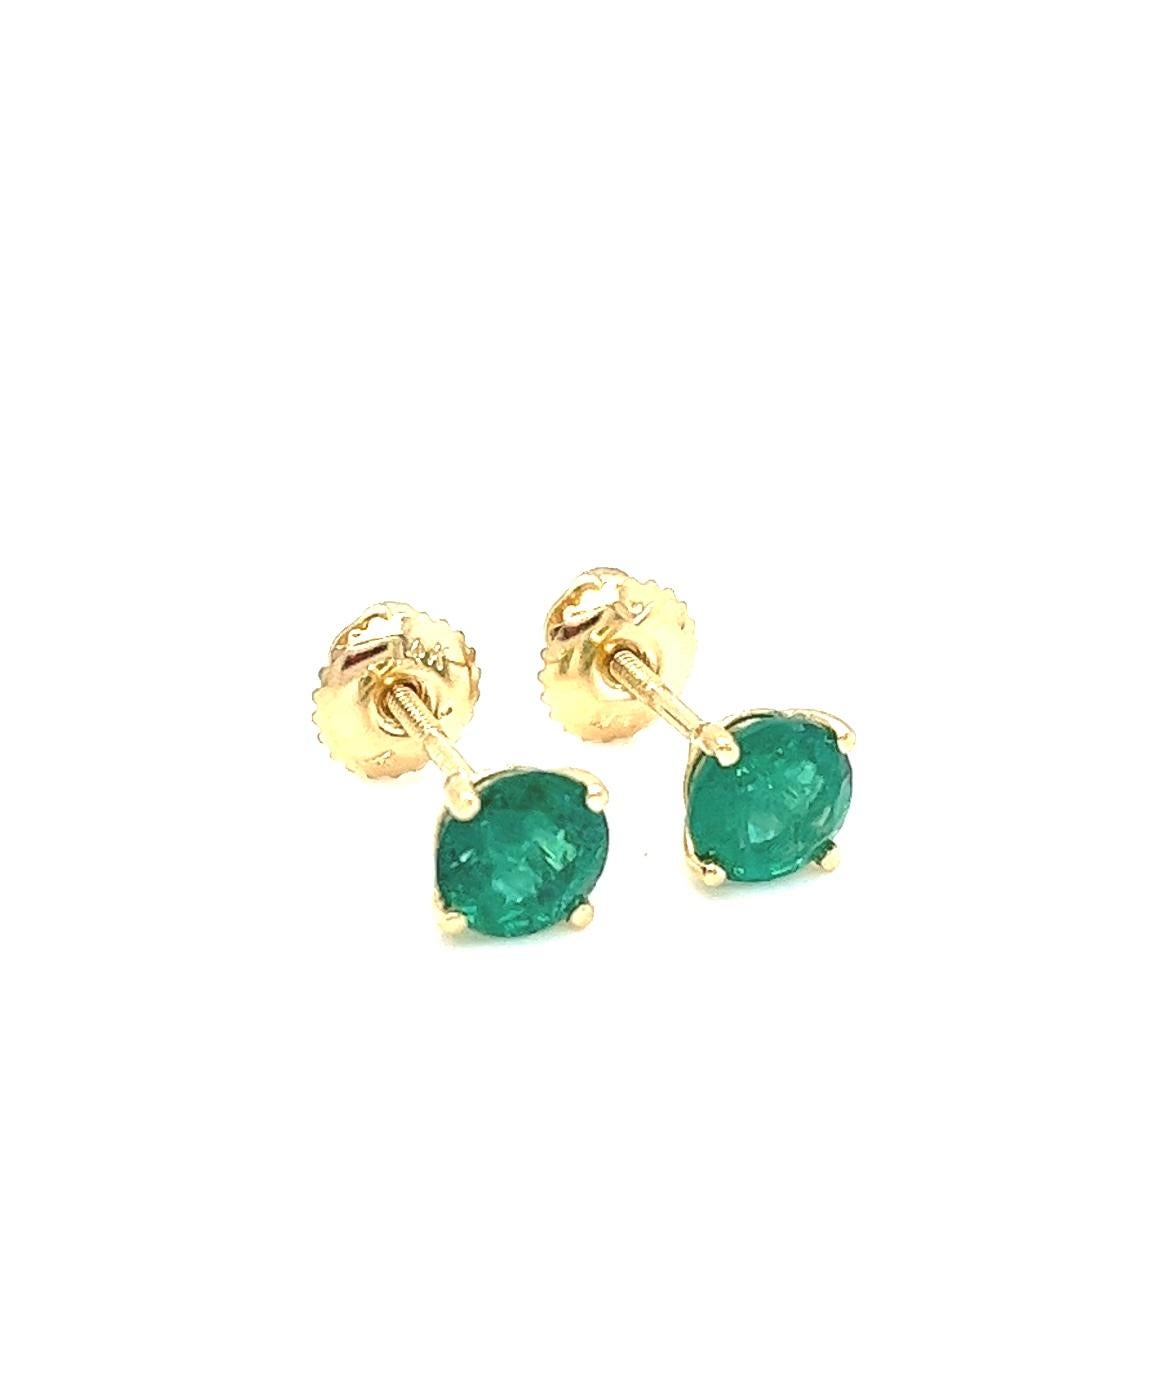 1.31 carats round Emerald Stud Earrings in 14K Yellow Gold. For Sale 1